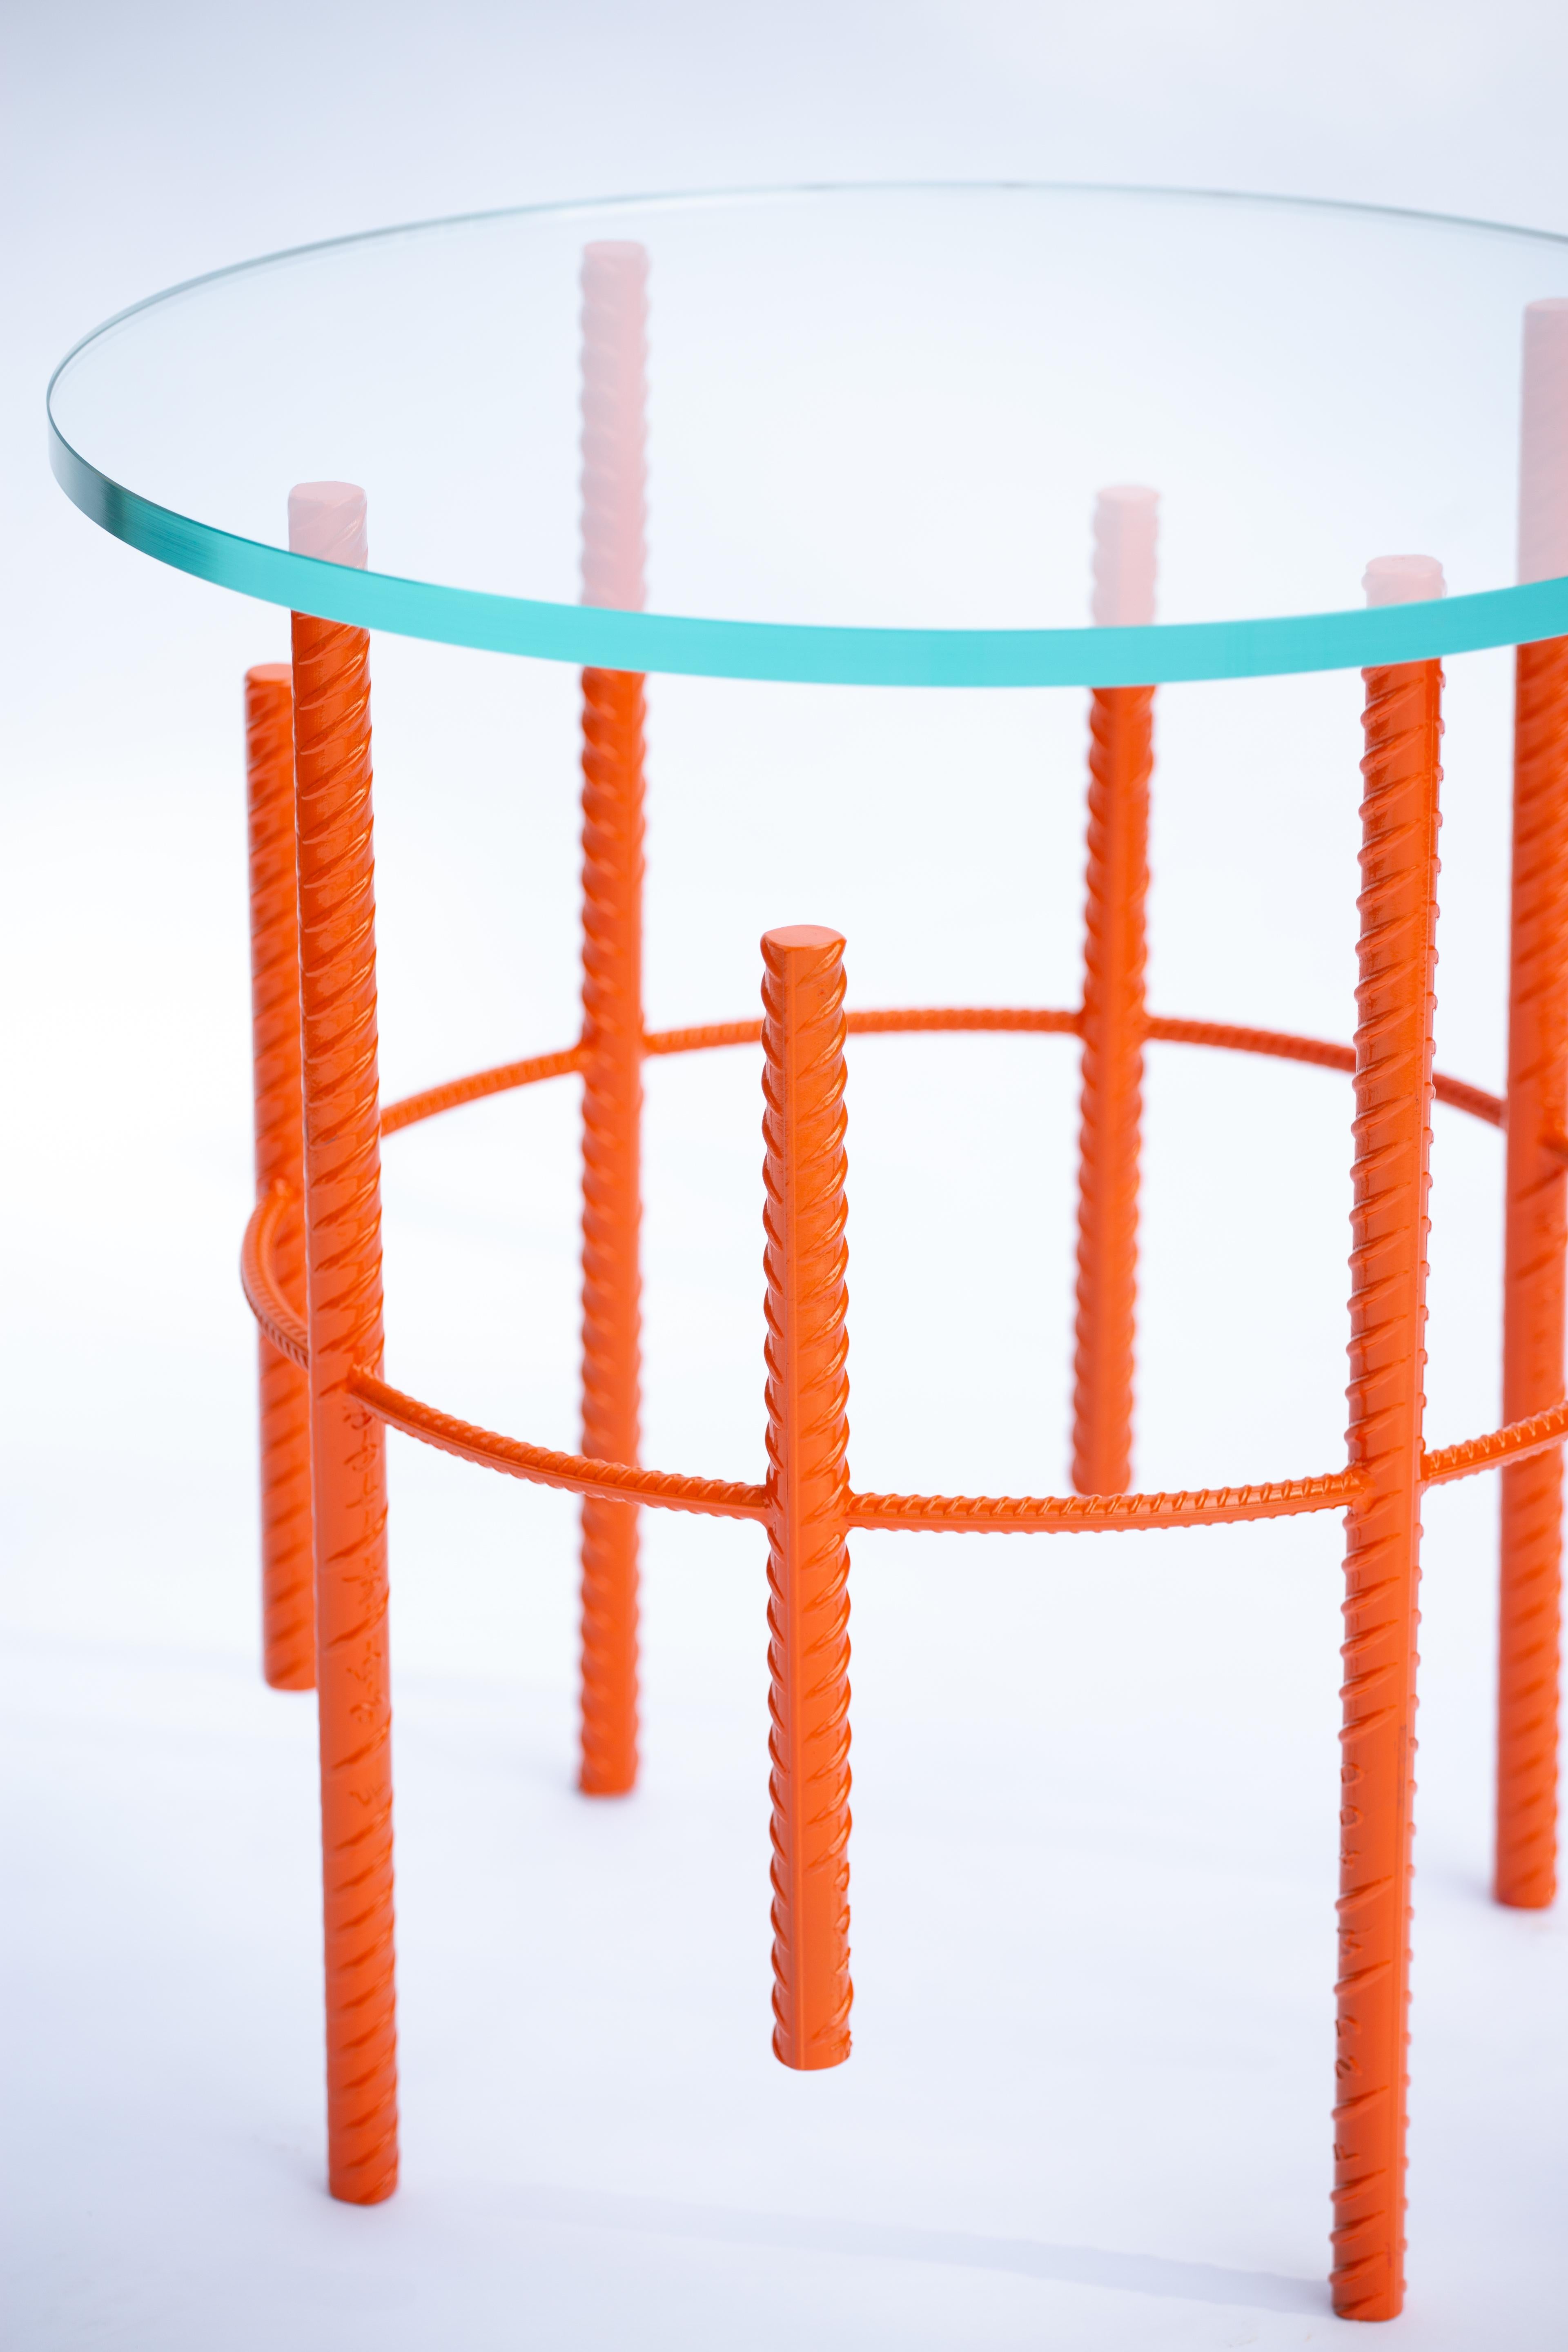 Handcrafted by Troy Smith from Troy Smith Studio. The base is made from one-inch construction rebar and carefully welded together to form a sputnik space-like form. The base is powder coated in coral orange. (Custom colour options are available on